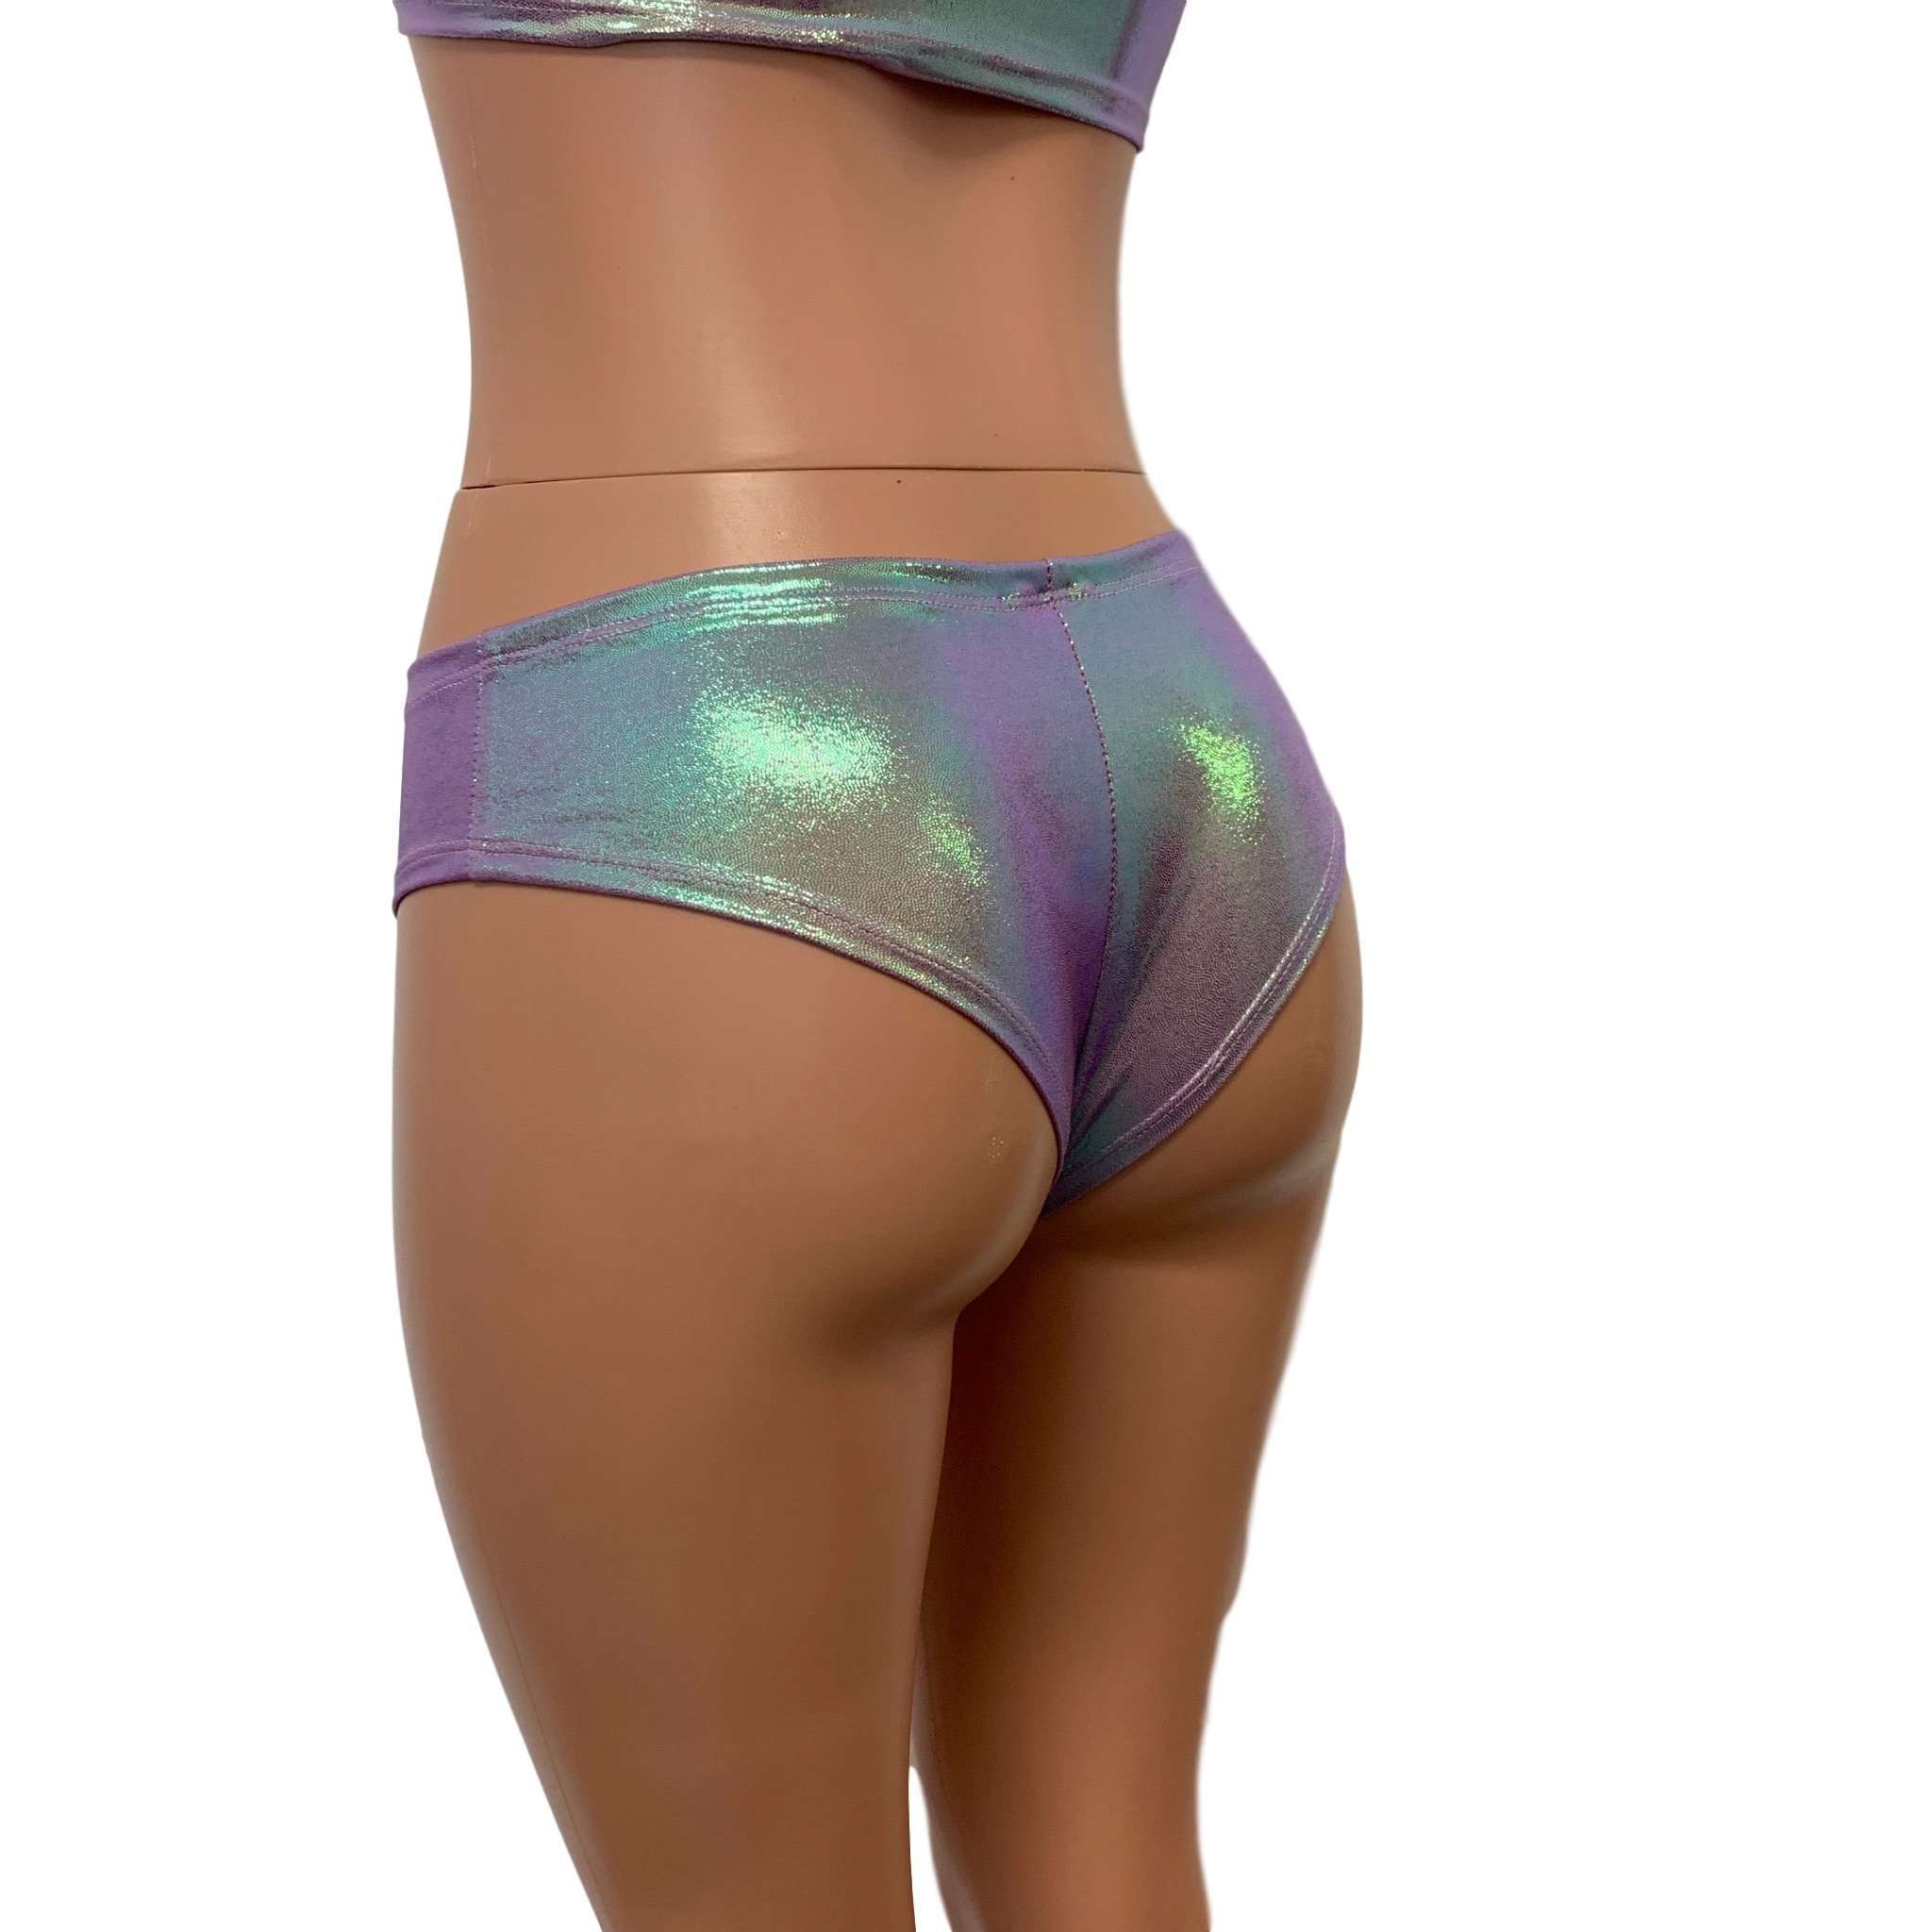 Exposed Side Panty, Rave Booty Shorts, Rave Outfits